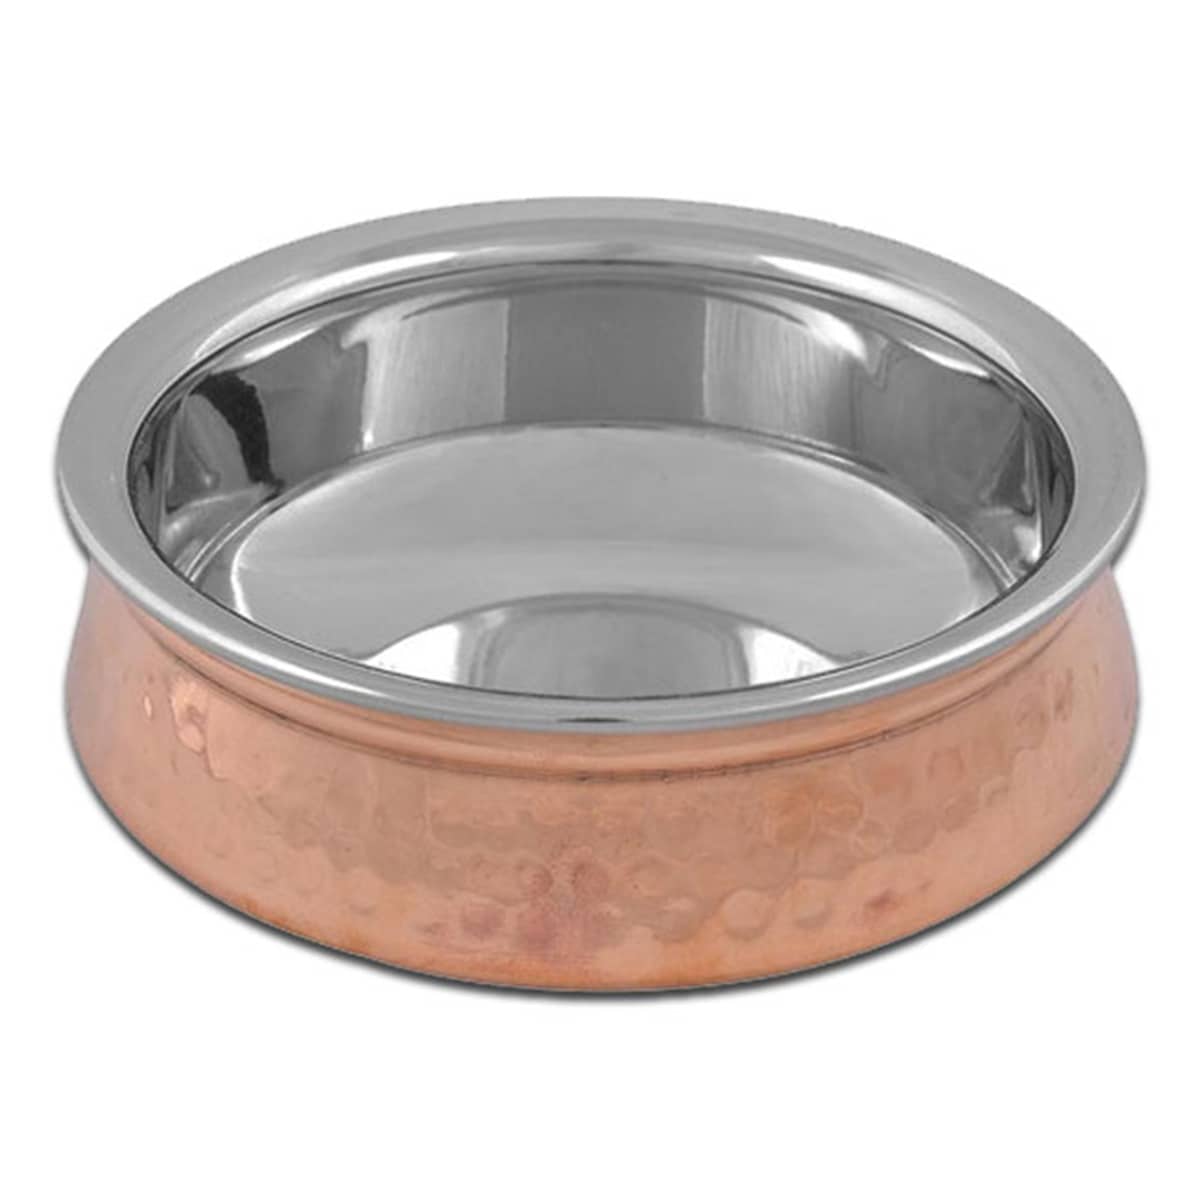 Buy IAG Products Copper and Steel Serving Dish (Handi) - 410 gm